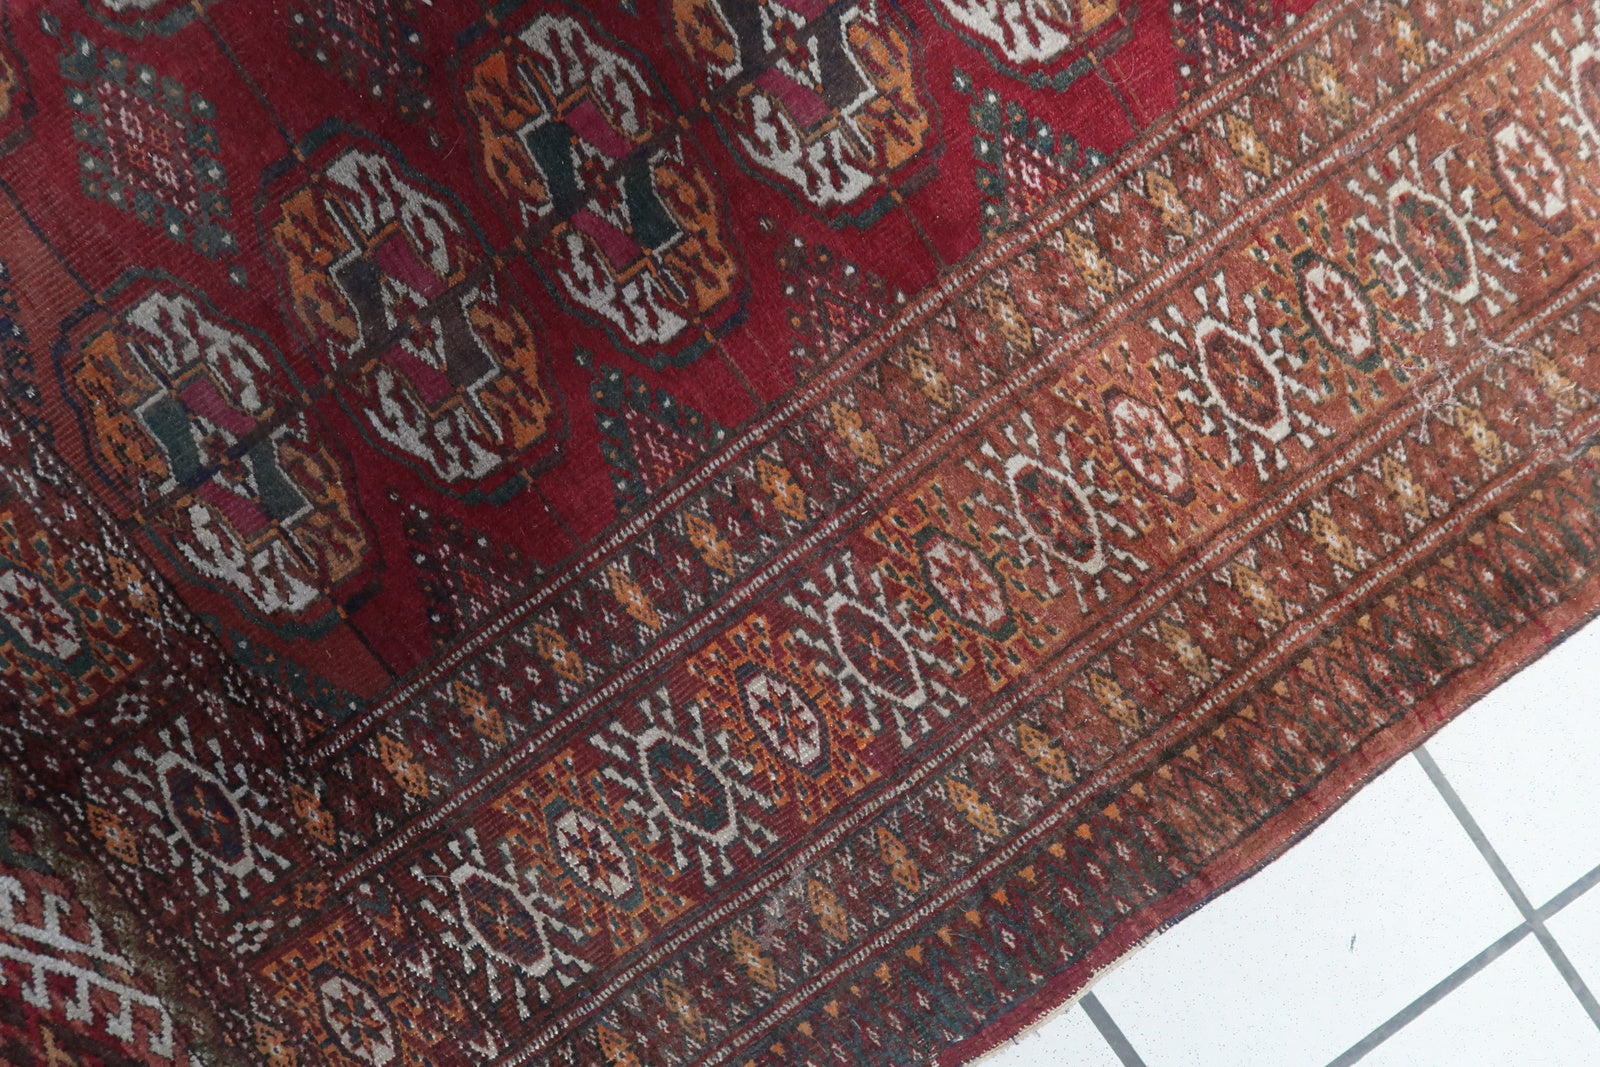 Close-up of the intricate patterns and color combinations on the Handmade Vintage Uzbek Bukhara Rug